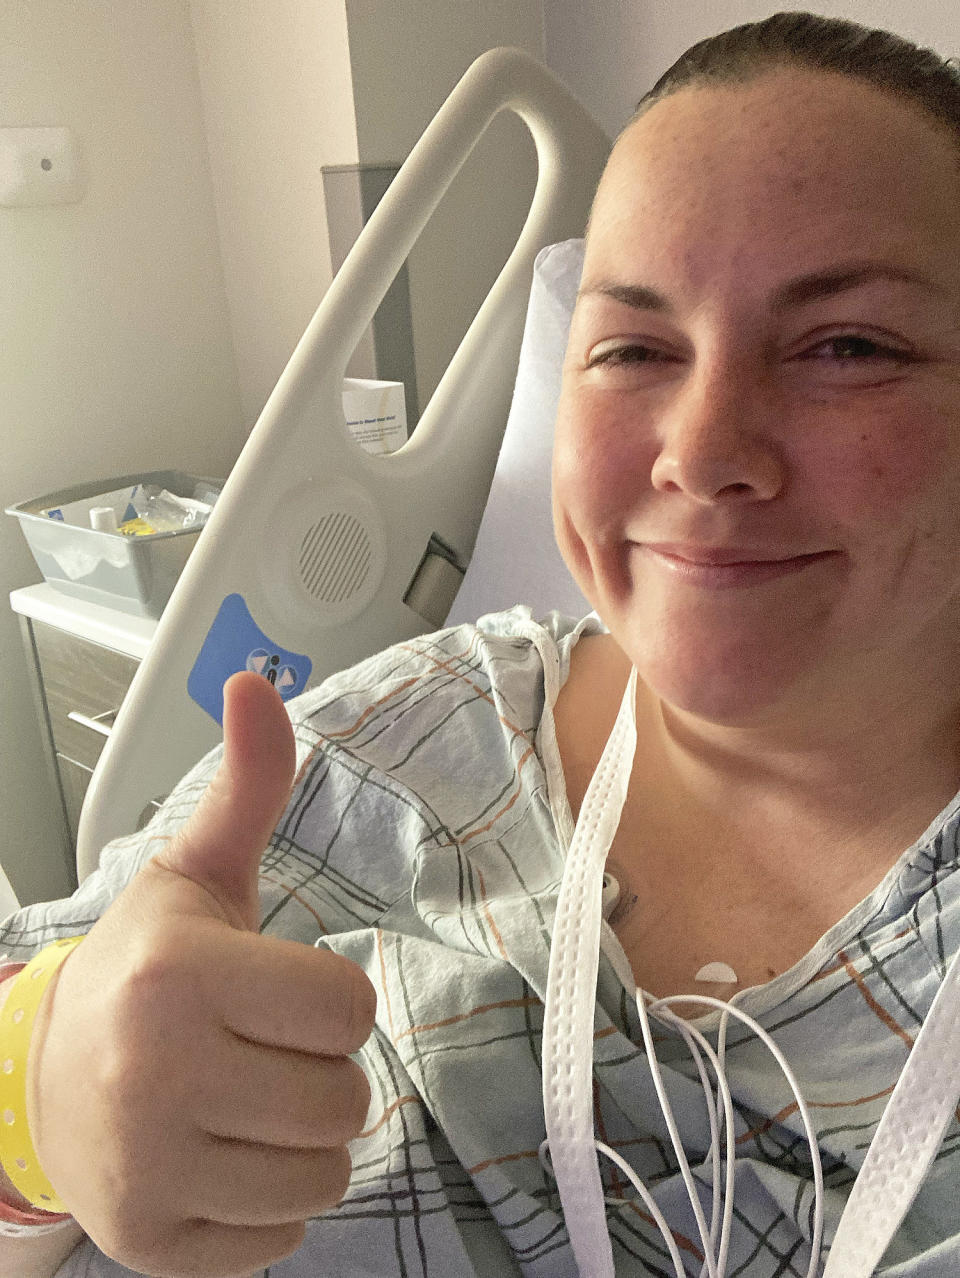 When Jessie Malone's Apple Watch told her she had Afib, she decided to go to the hospital. Without the alarm going off, she might have simply gone home and napped. (Courtesy Jessie Malone)